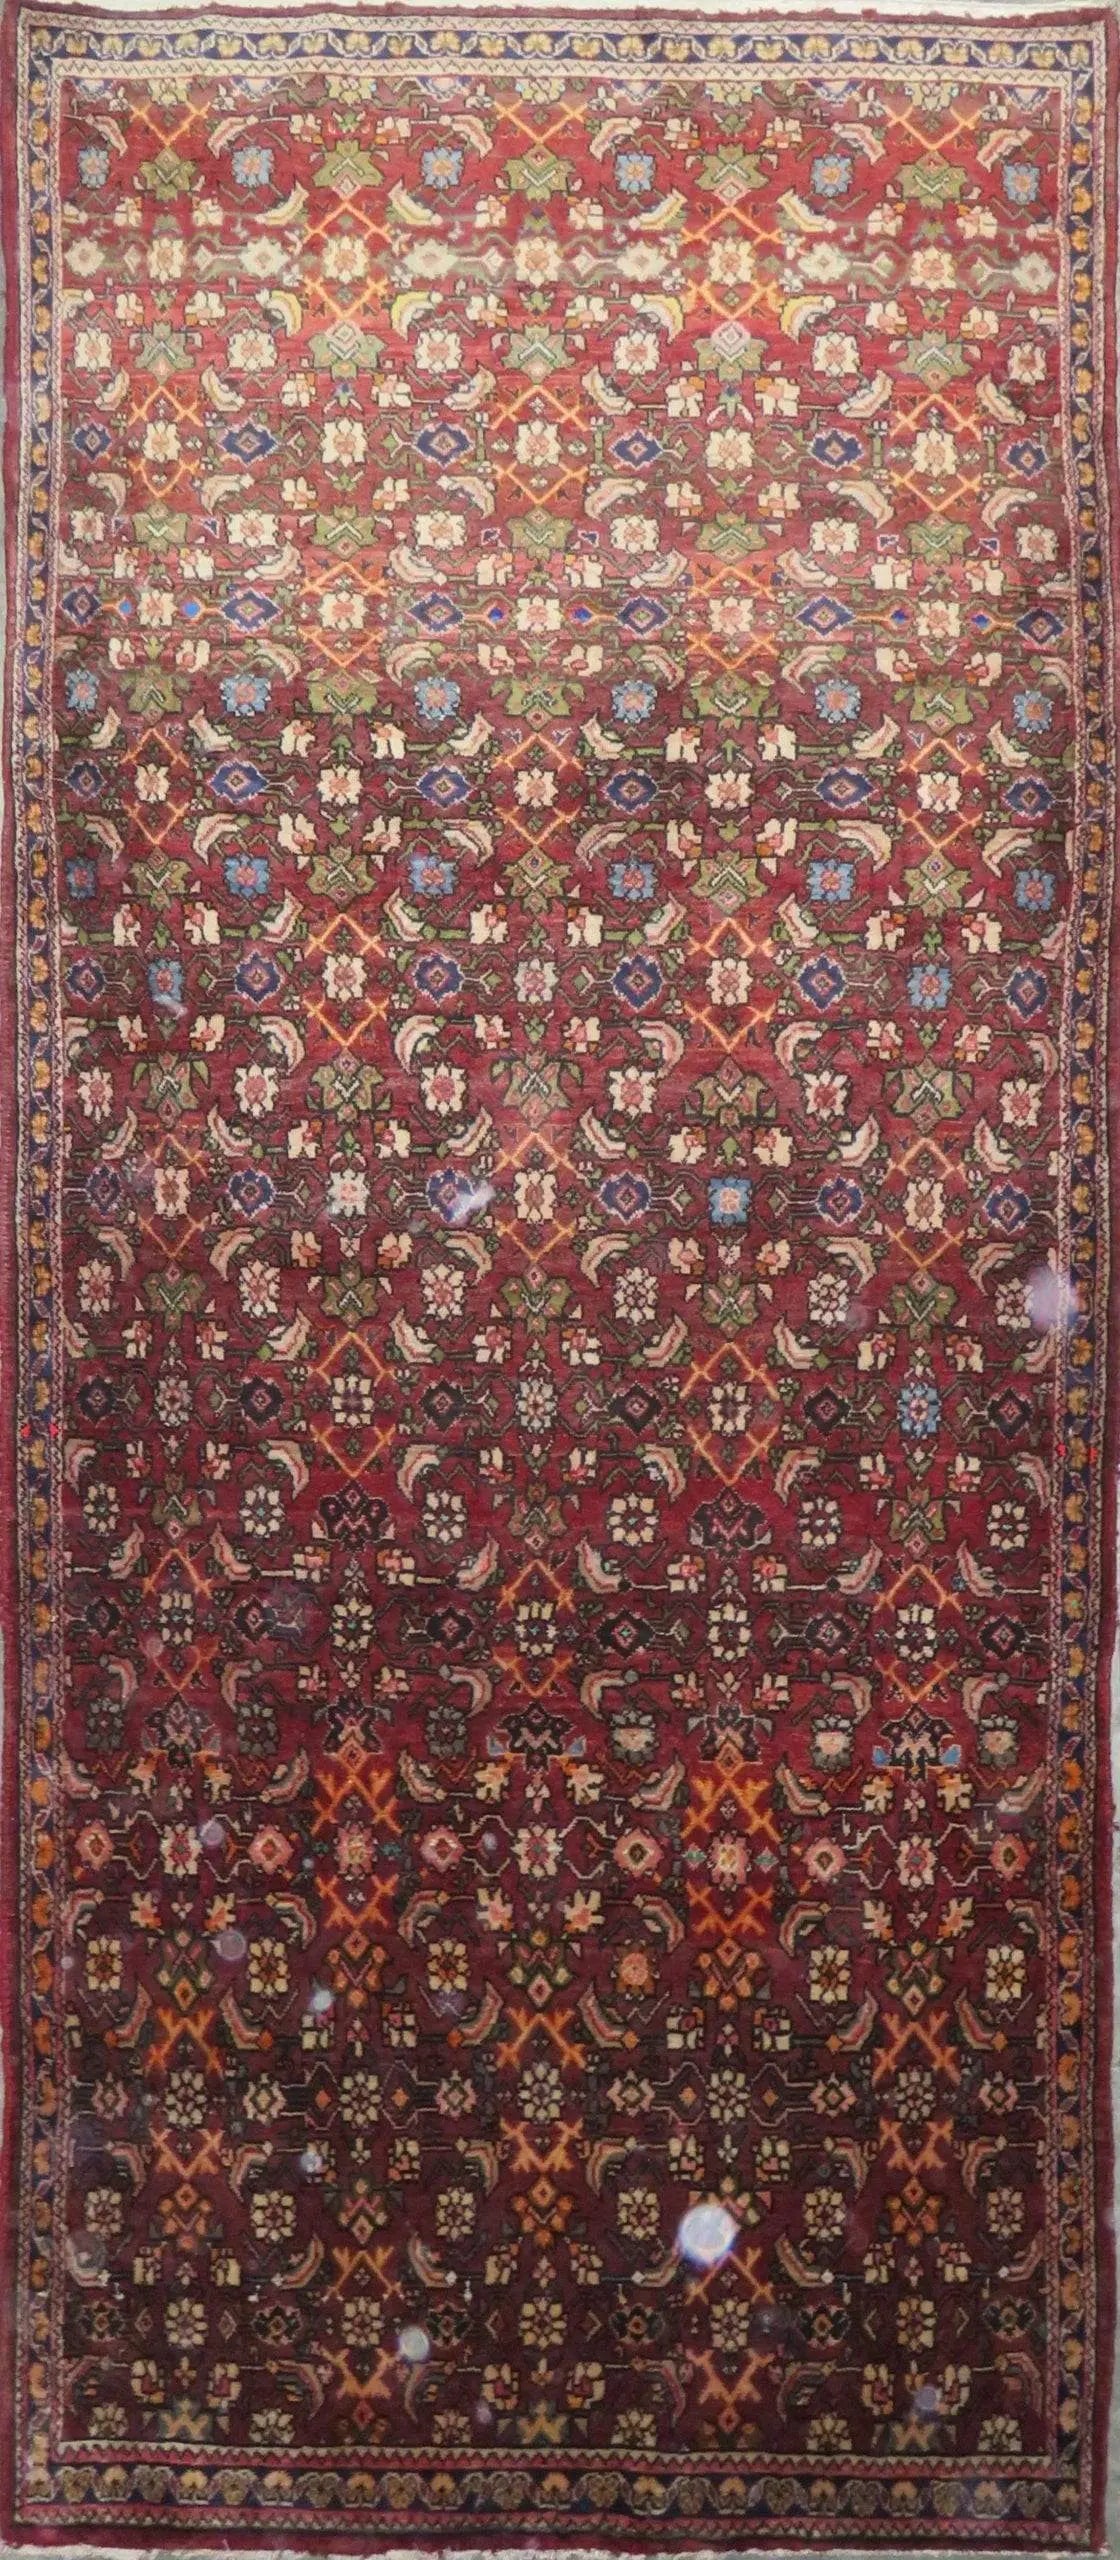 Hand-Knotted Persian Wool Rug _ Luxurious Vintage Design, 12'1" x 4'9", Artisan Crafted